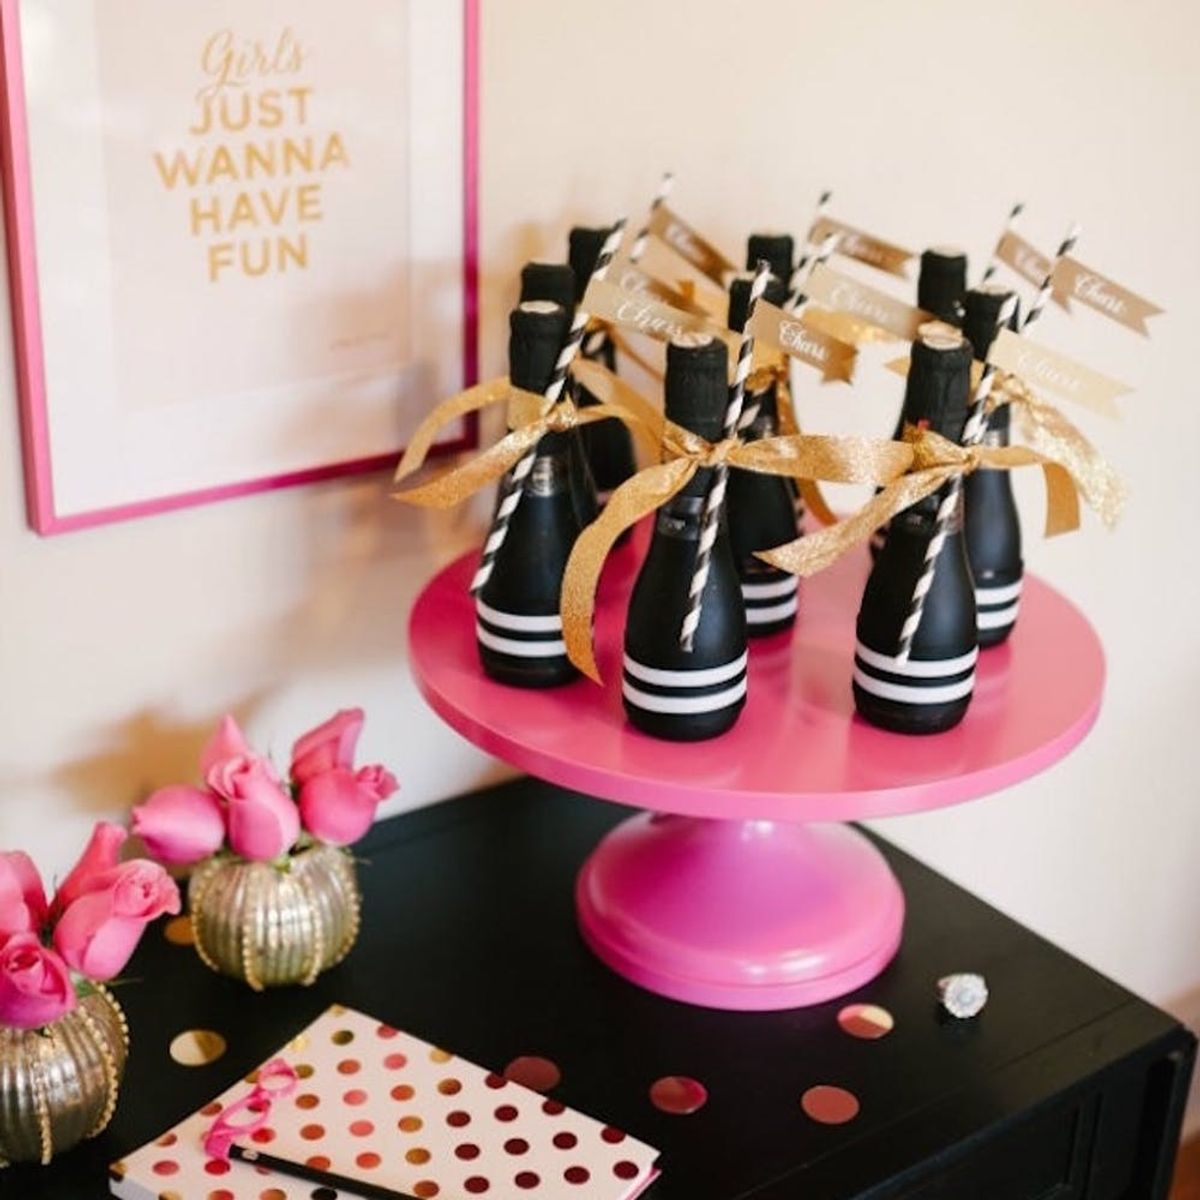 20 Kate Spade-Inspired Bridal Shower Ideas for the Chic Bride